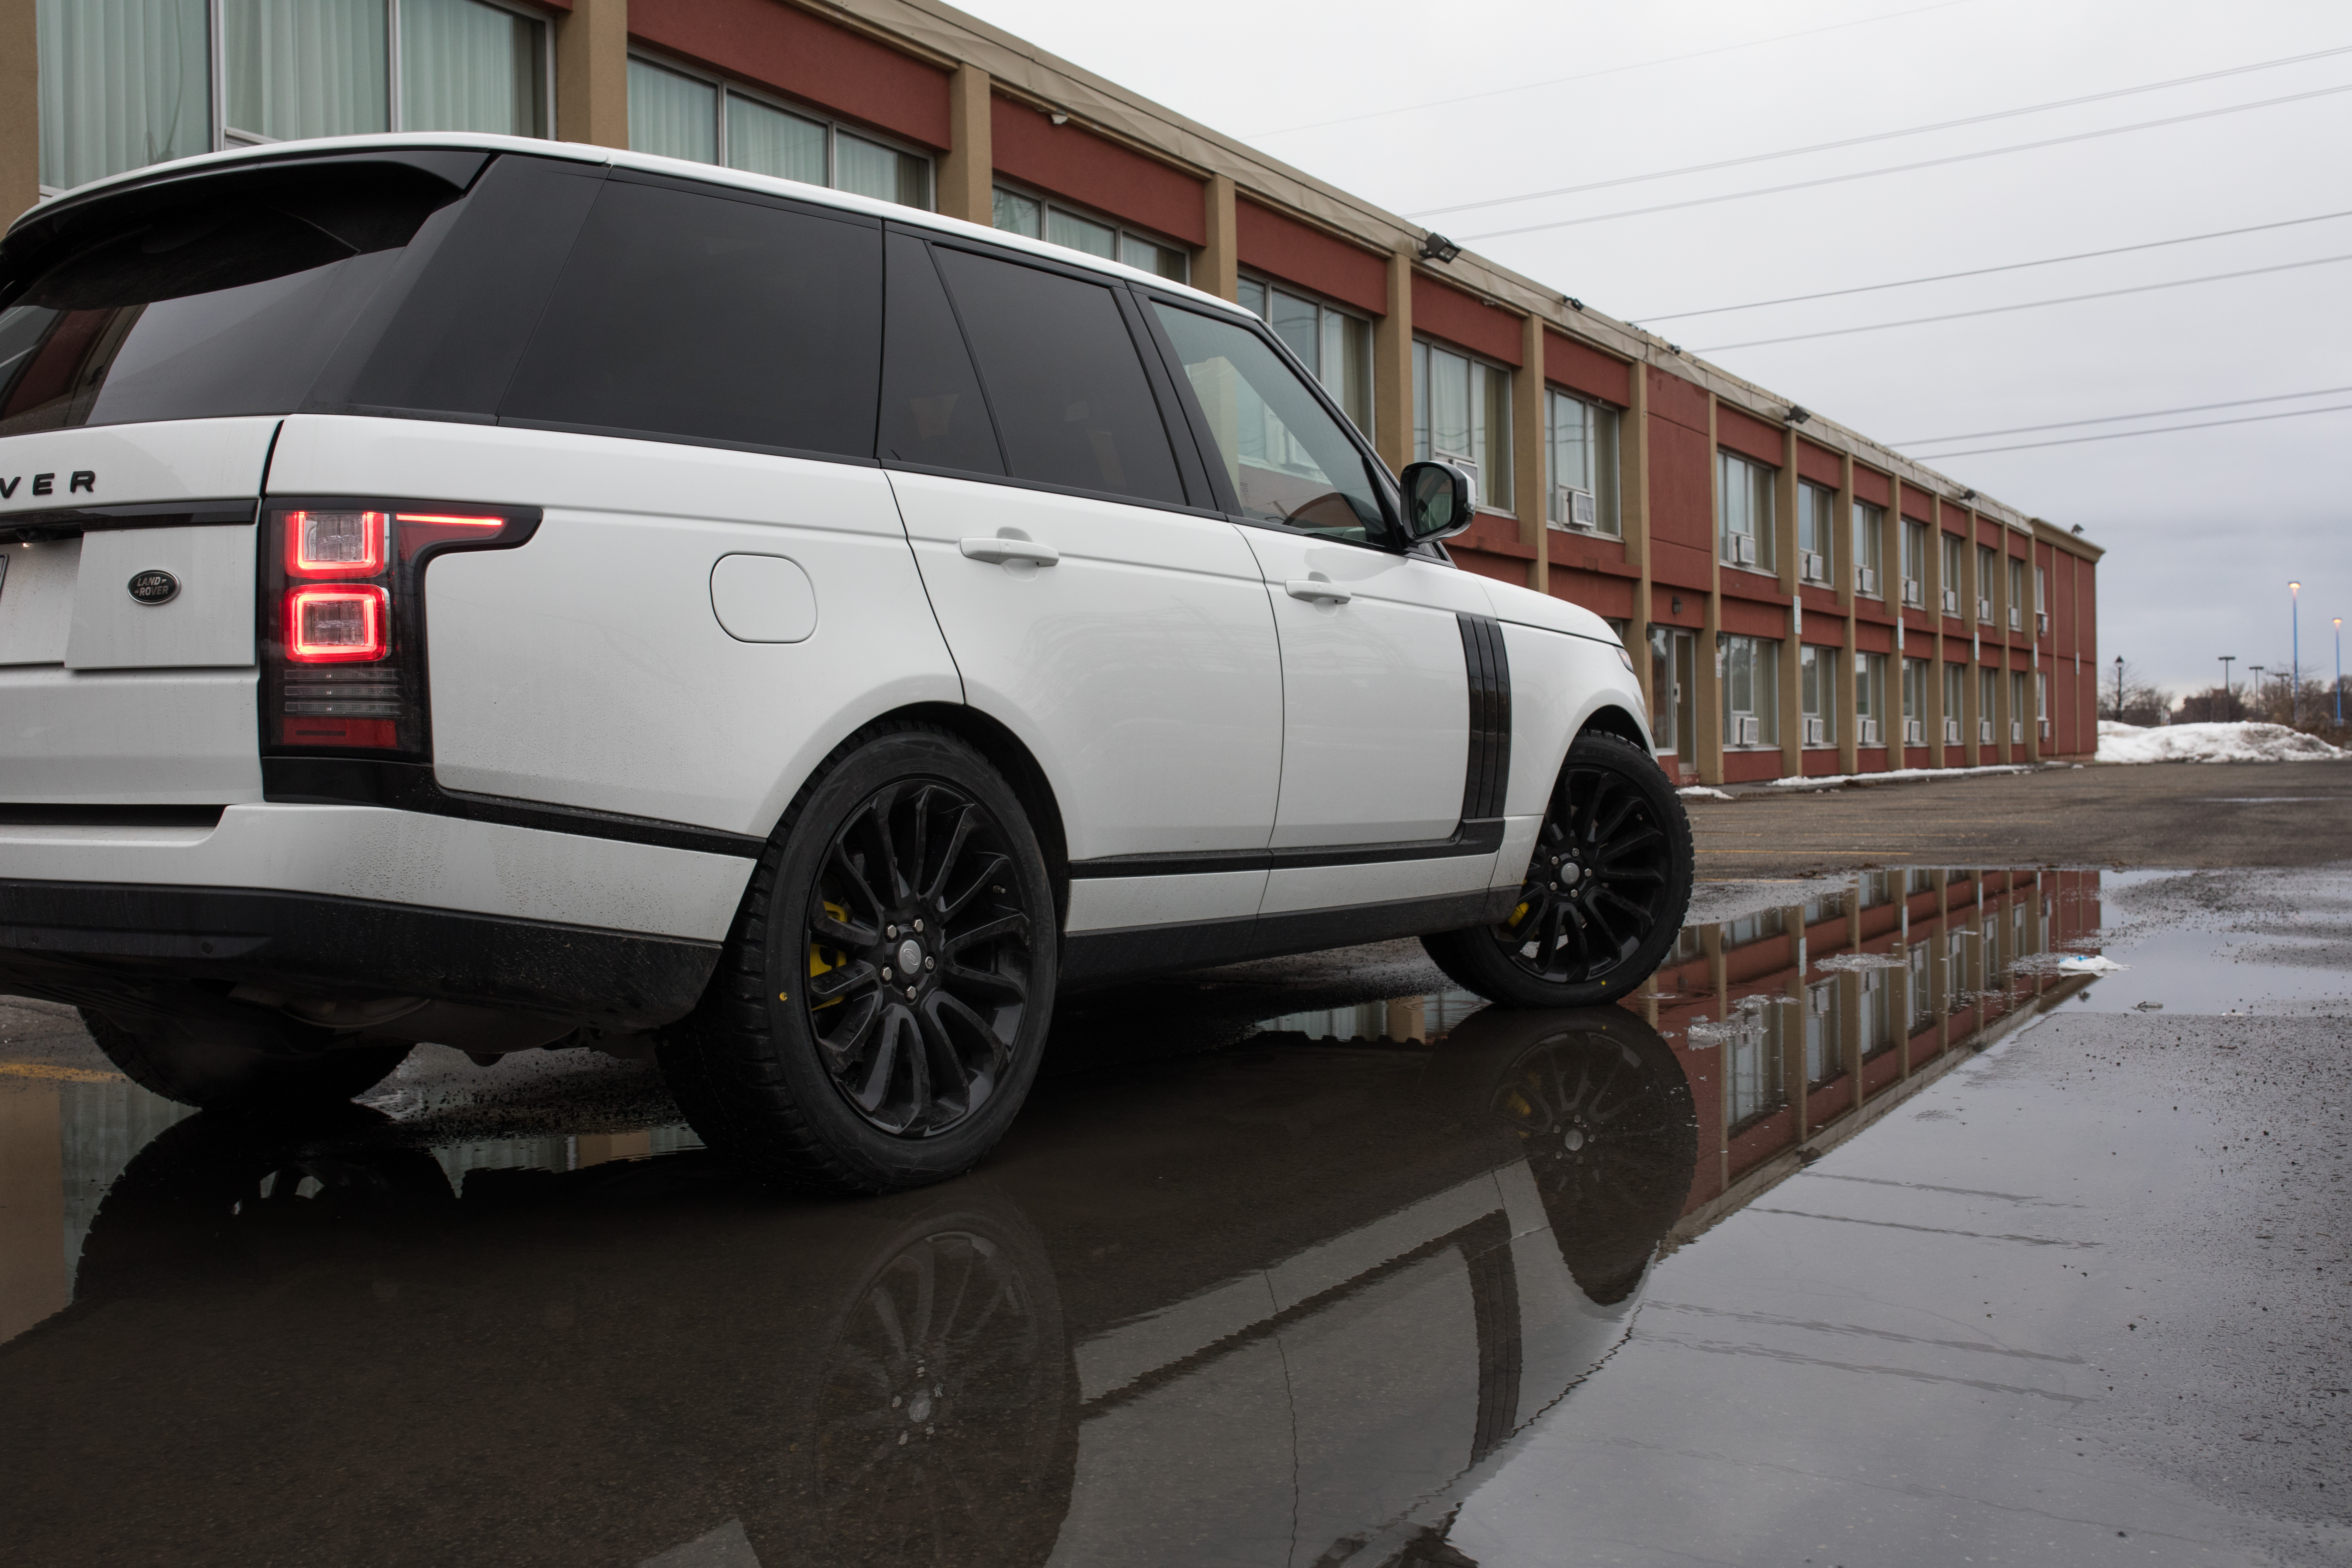 RANGE ROVER VOGUE SUPERCHARGED WHITE 1617 OR SIMILAR